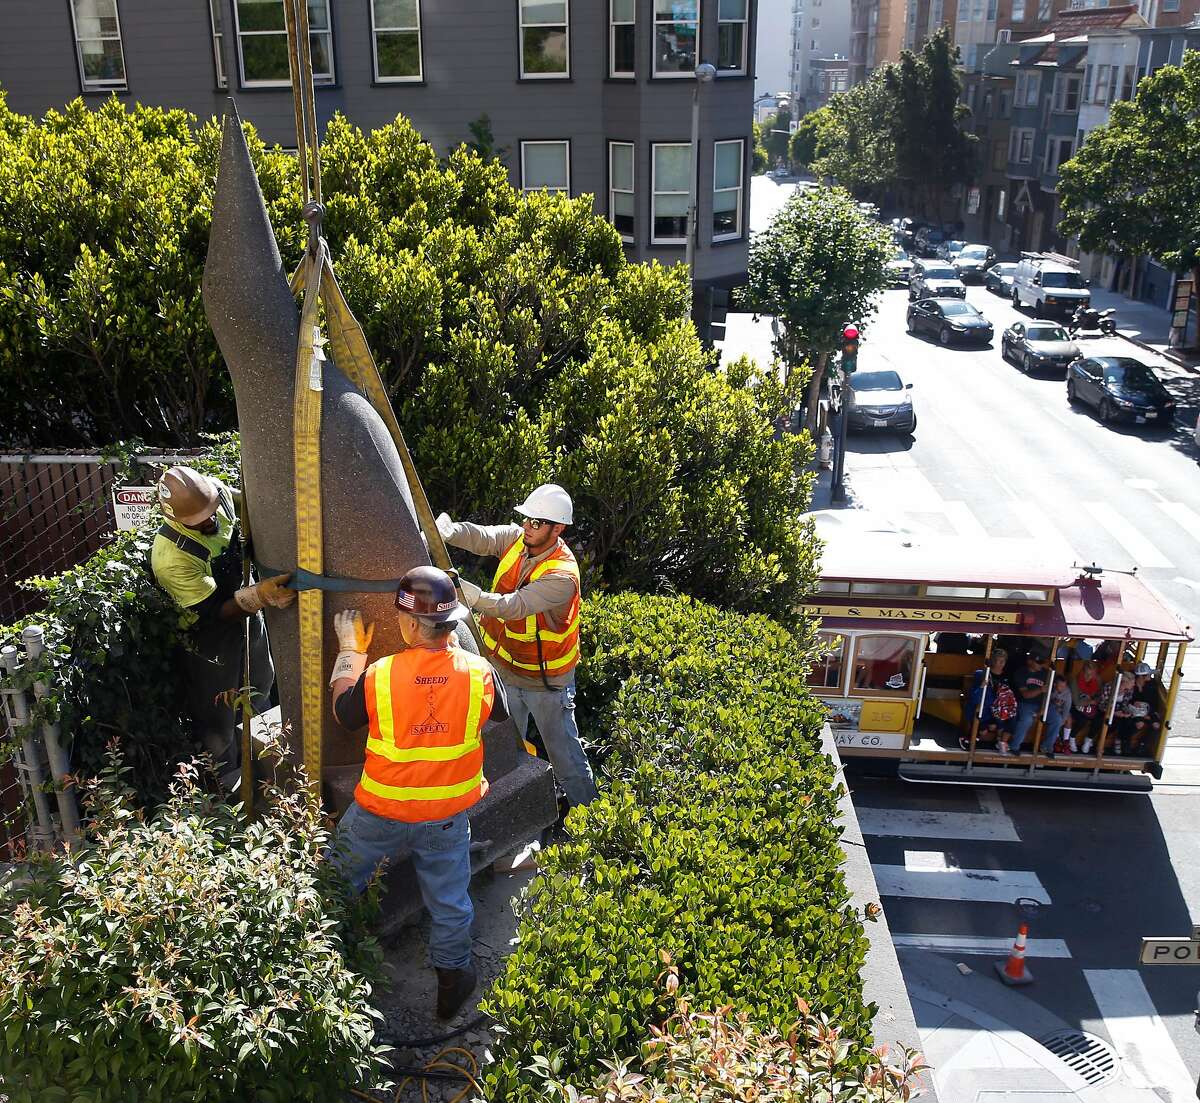 A penguin sculpture by Beniamino Bufano installed in the back corner of the Stanford Court Hotel is prepped for removal by a crane crew from its perch above Pine and Powell streets in San Francisco, Calif. on Saturday, July 22, 2017. The penguin will be restored and reinstalled in the main entrance to the hotel, which is undergoing a renovation, on California Street.